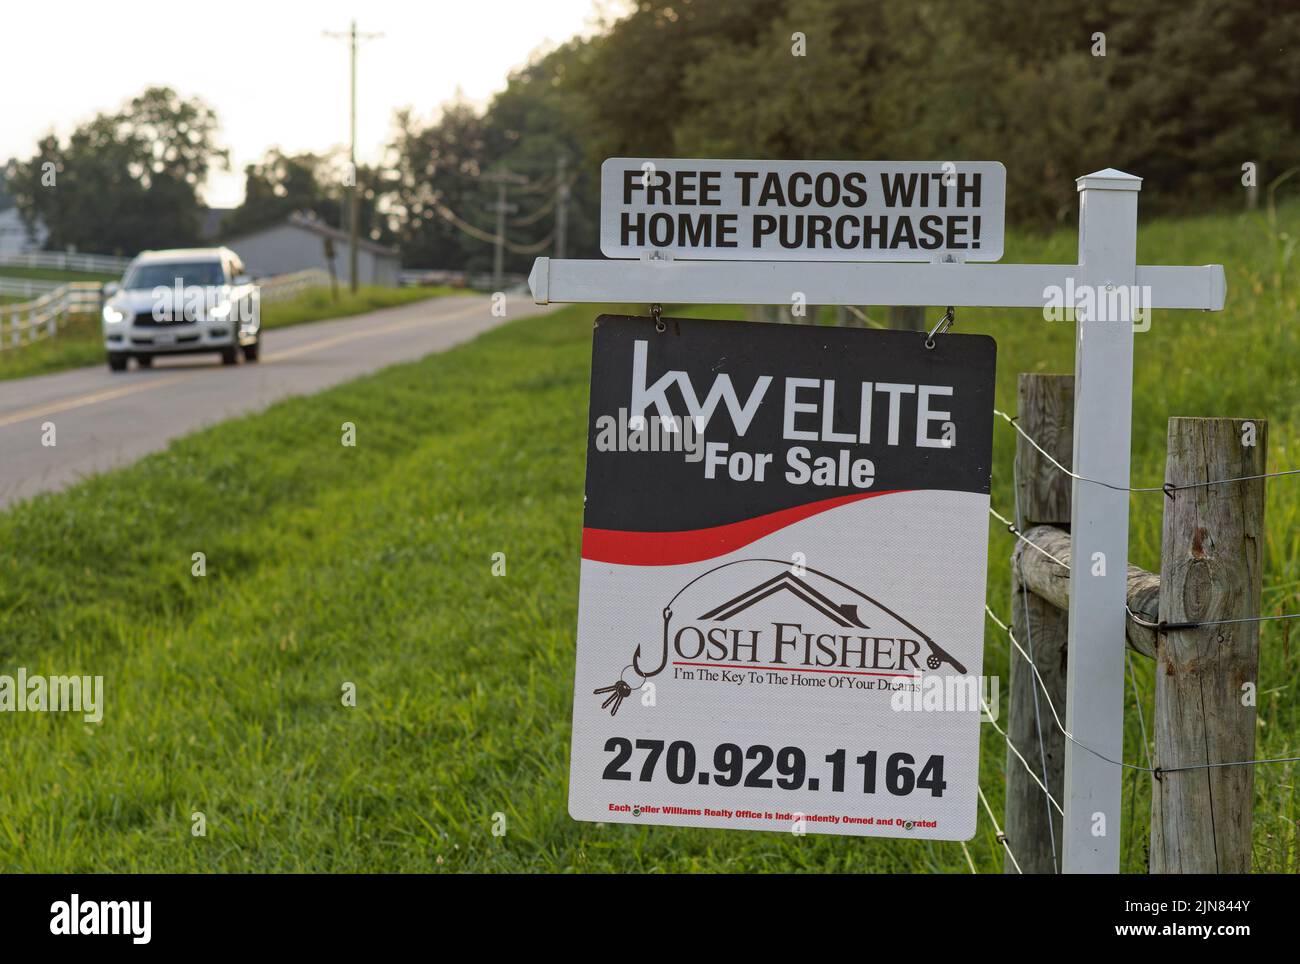 Utica, Kentucky, USA. 09 Aug 2022. A vehicle drives past a Keller Williams Elite real estate for-sale sign advertising 'free tacos with home purchase!' The American housing market appears to be moving toward a state of equilibrium, according to a National Association of Realtors analysis of July housing data, but median asking prices are still close to the all-time high set in June 2022, with most homes selling slightly faster than in 2021 and significantly faster than before the COVID-19 pandemic. (Credit: Billy Suratt/Apex MediaWire via Alamy Live News) Stock Photo